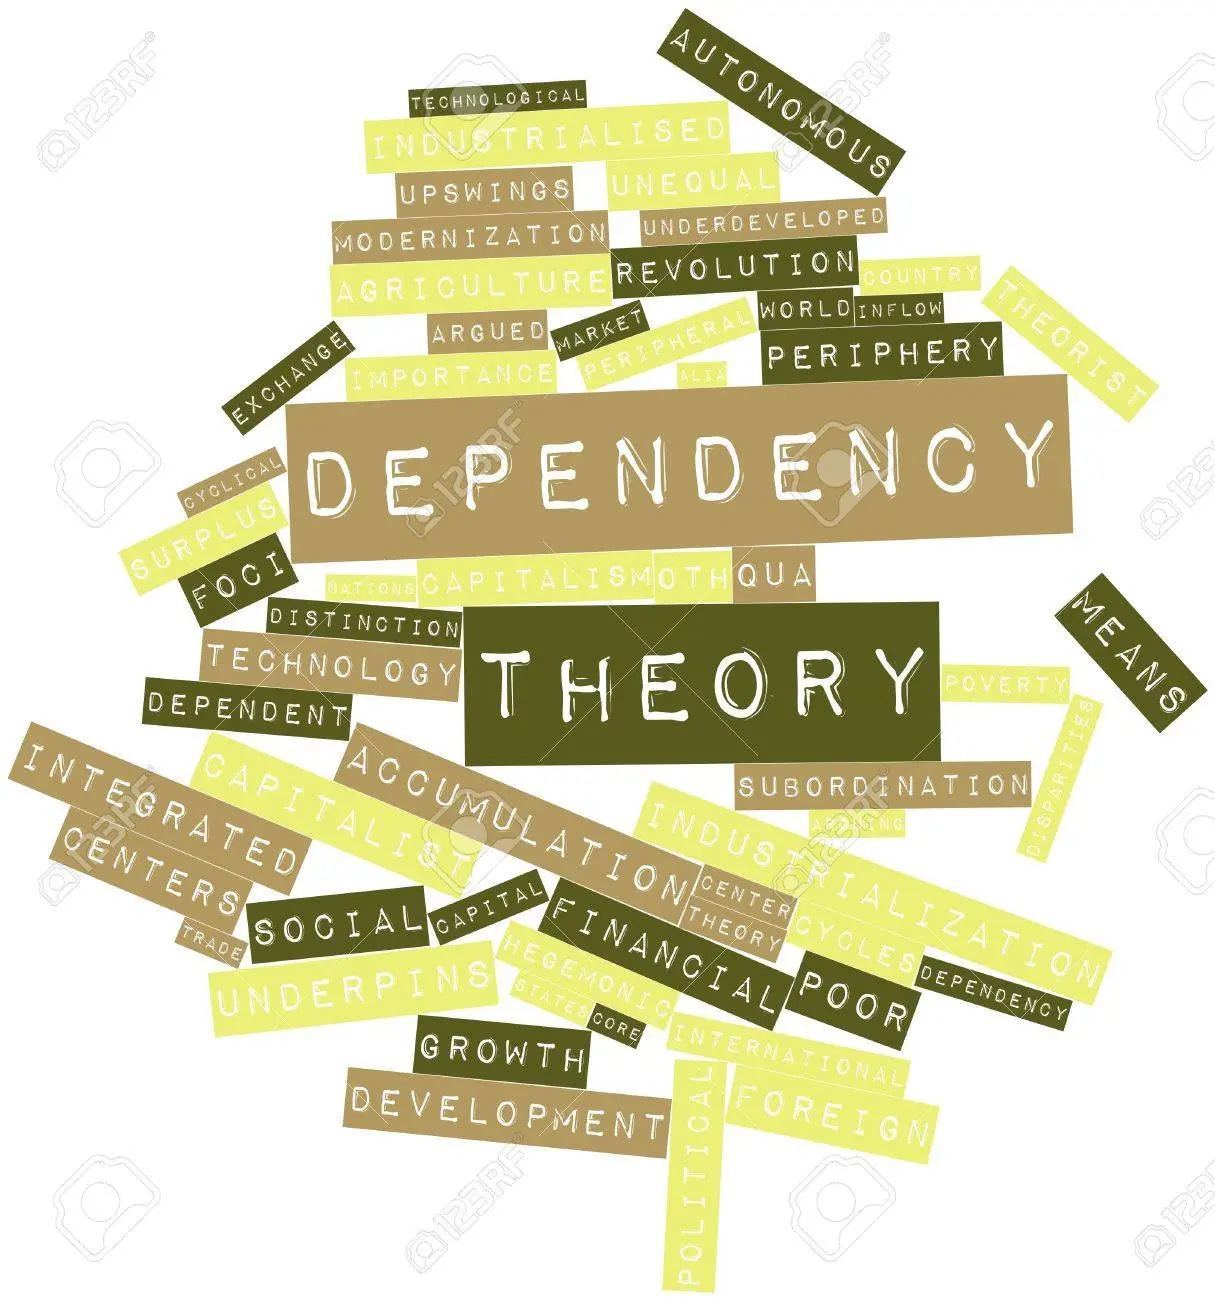 Dependency Development by Cordoso, Senghass and Menzel